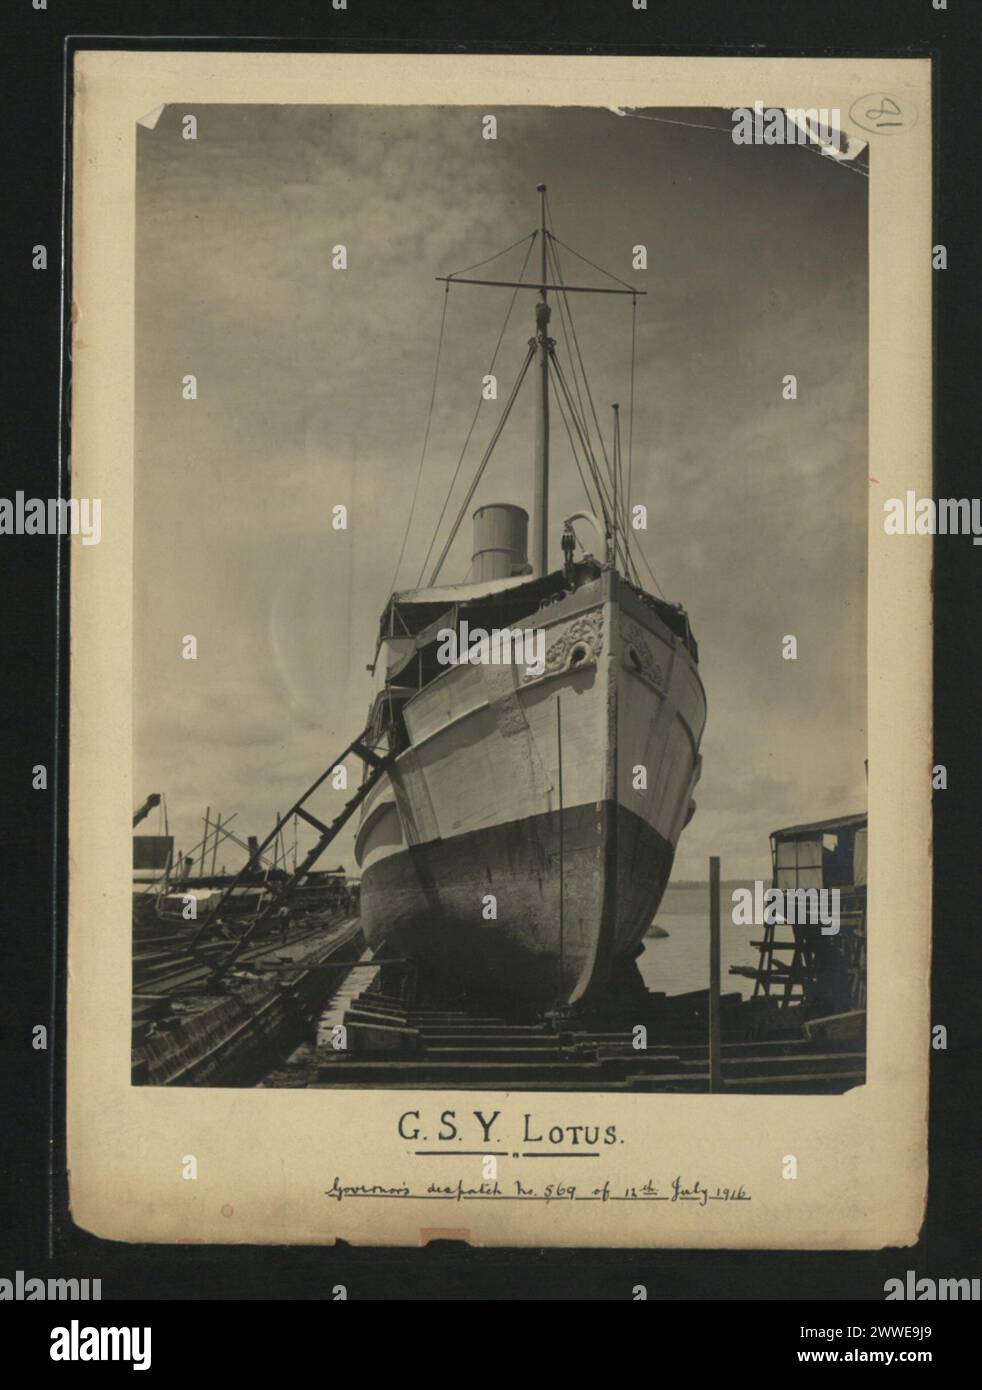 Description: G.S.Y Lotus. Governor's despatch no. 569 of 12th July 1916 Location: Borneo Date: 12 July 1916 asia, malaysia, borneo, sabah, asiathroughalens Stock Photo